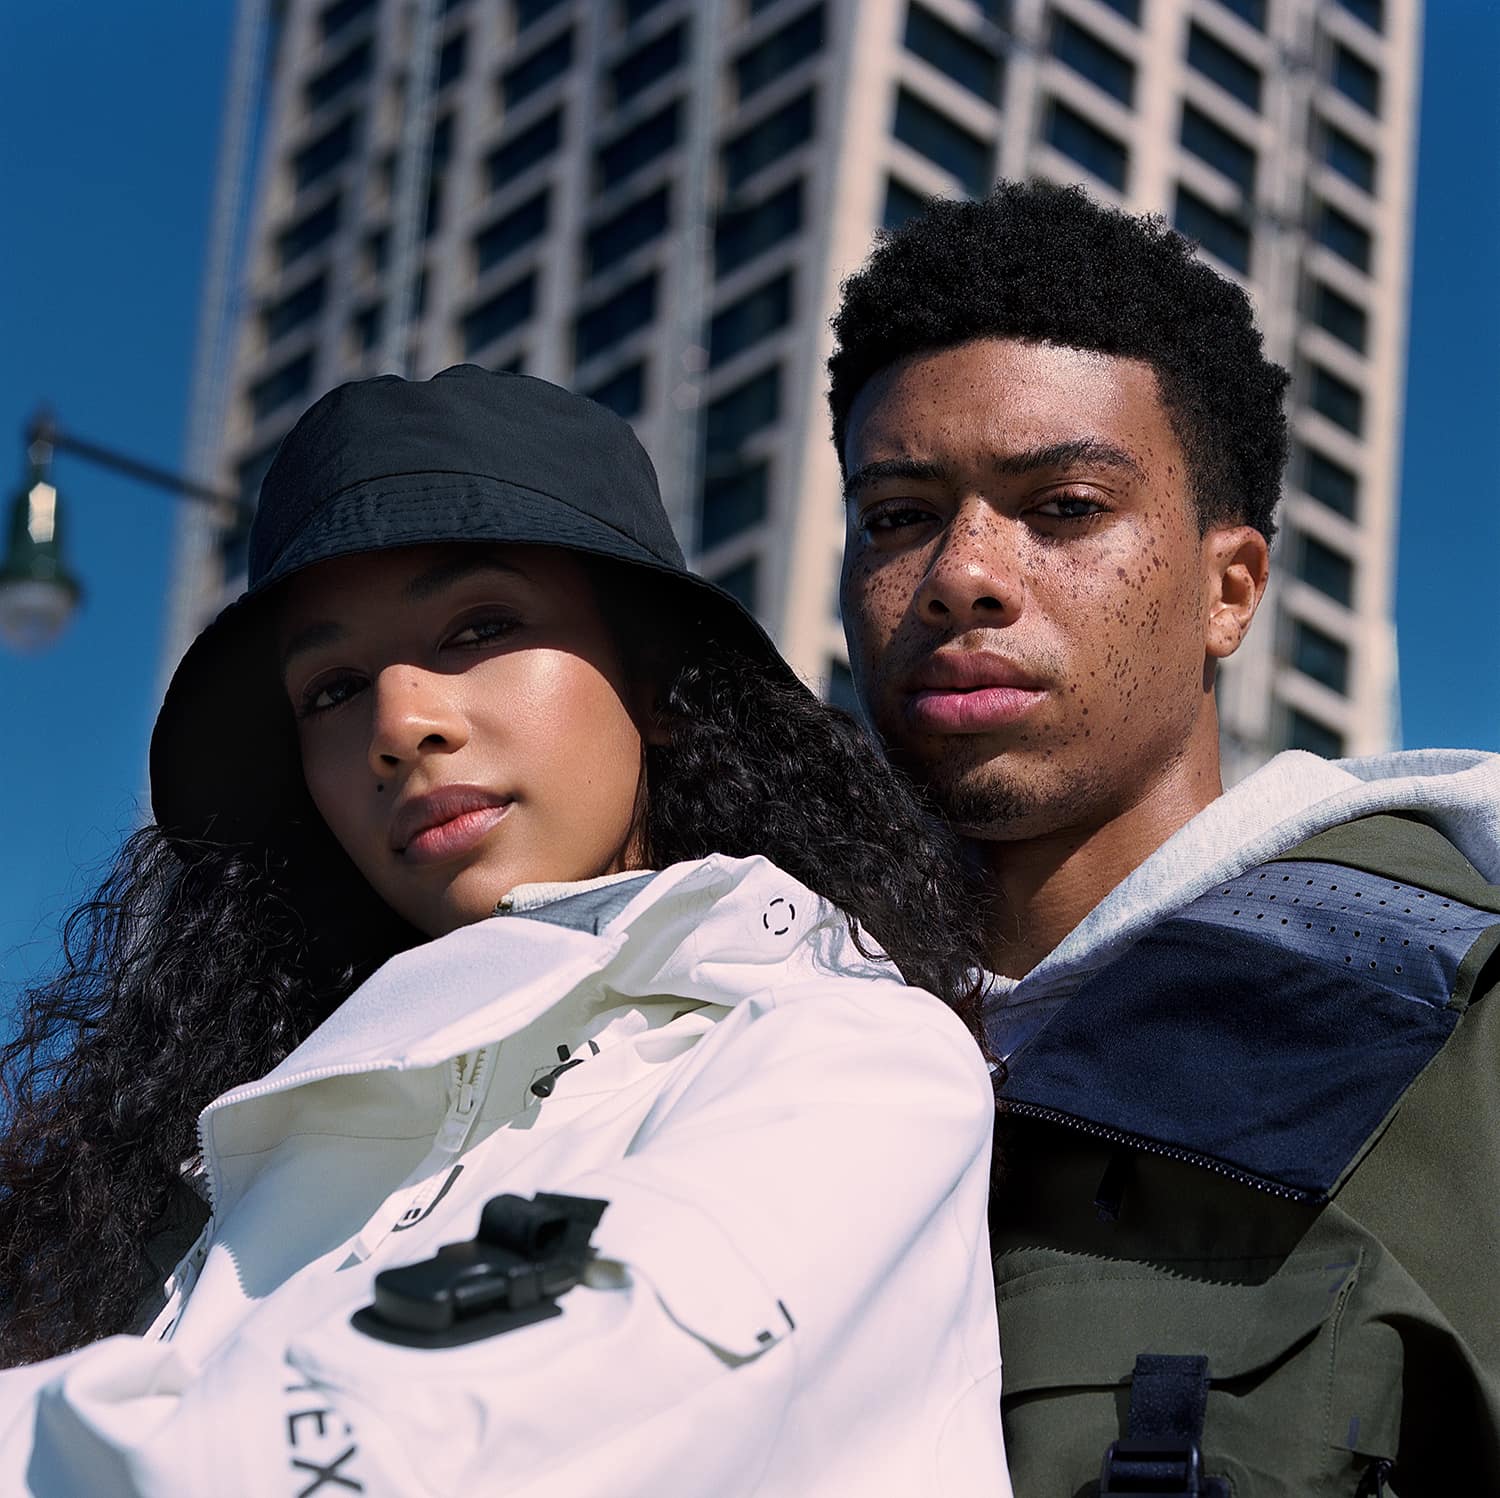 Julia Biango and Leron Nurse wearing Armada ski outerwear jackets, her jacket is white his jacket is army green. She is wearing a bucket hat. The sky is blue and in the background a tall skyscraper building and lamppost. The male model has a lot of freckles. Lookbook photographed by New York photographer Maria Bruun. The image was taken using the Hasselblad 500CM camera and Kodak Portra film.